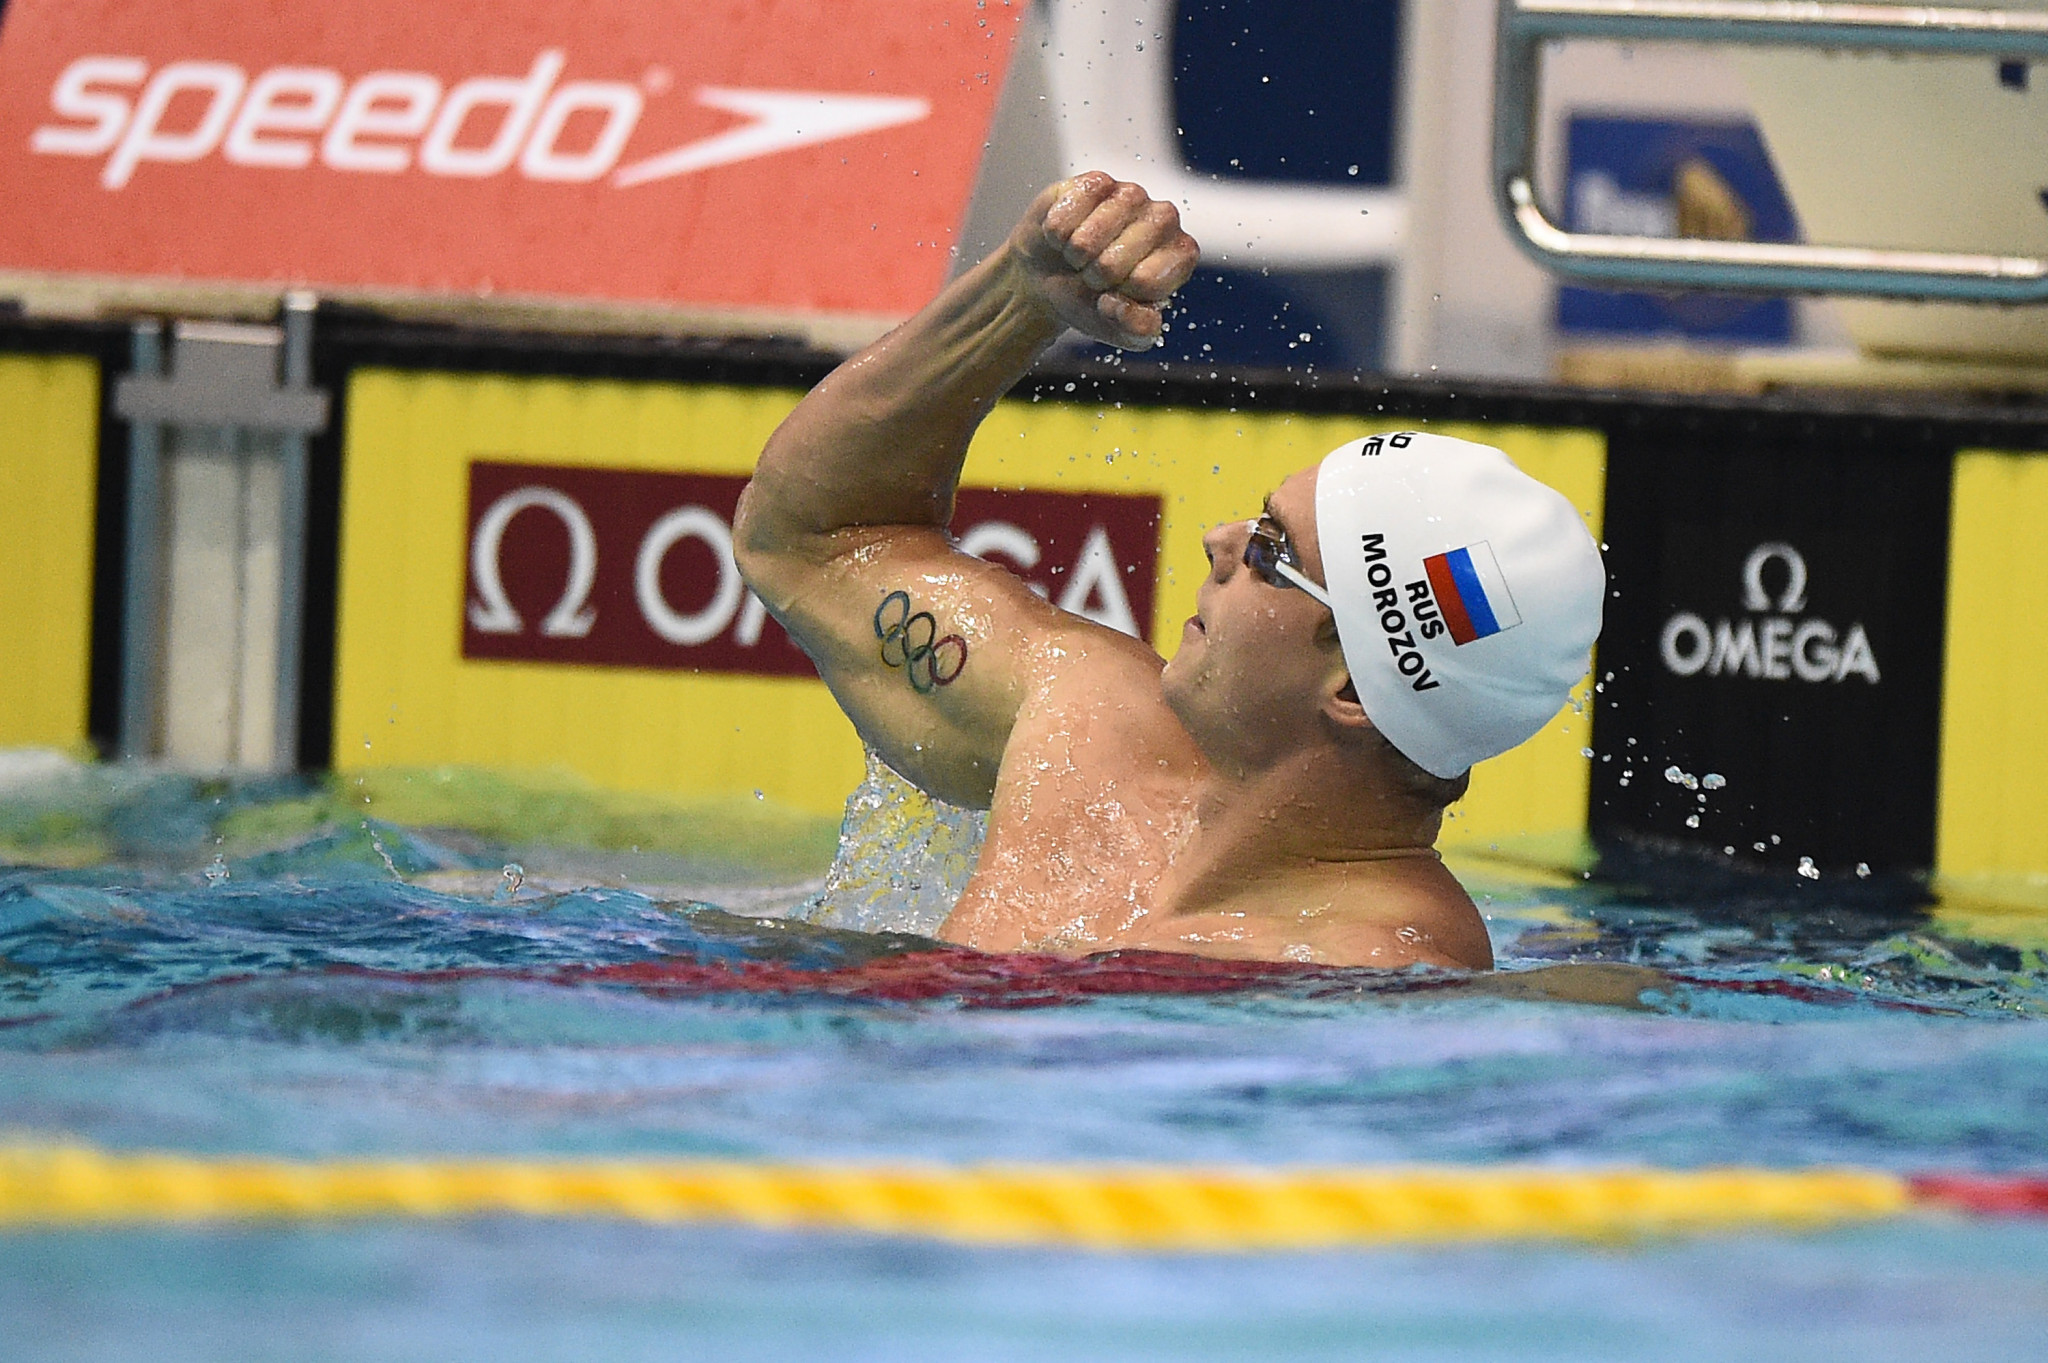 Morozov sets stunning time in men's 100m freestyle at FINA World Cup in Singapore